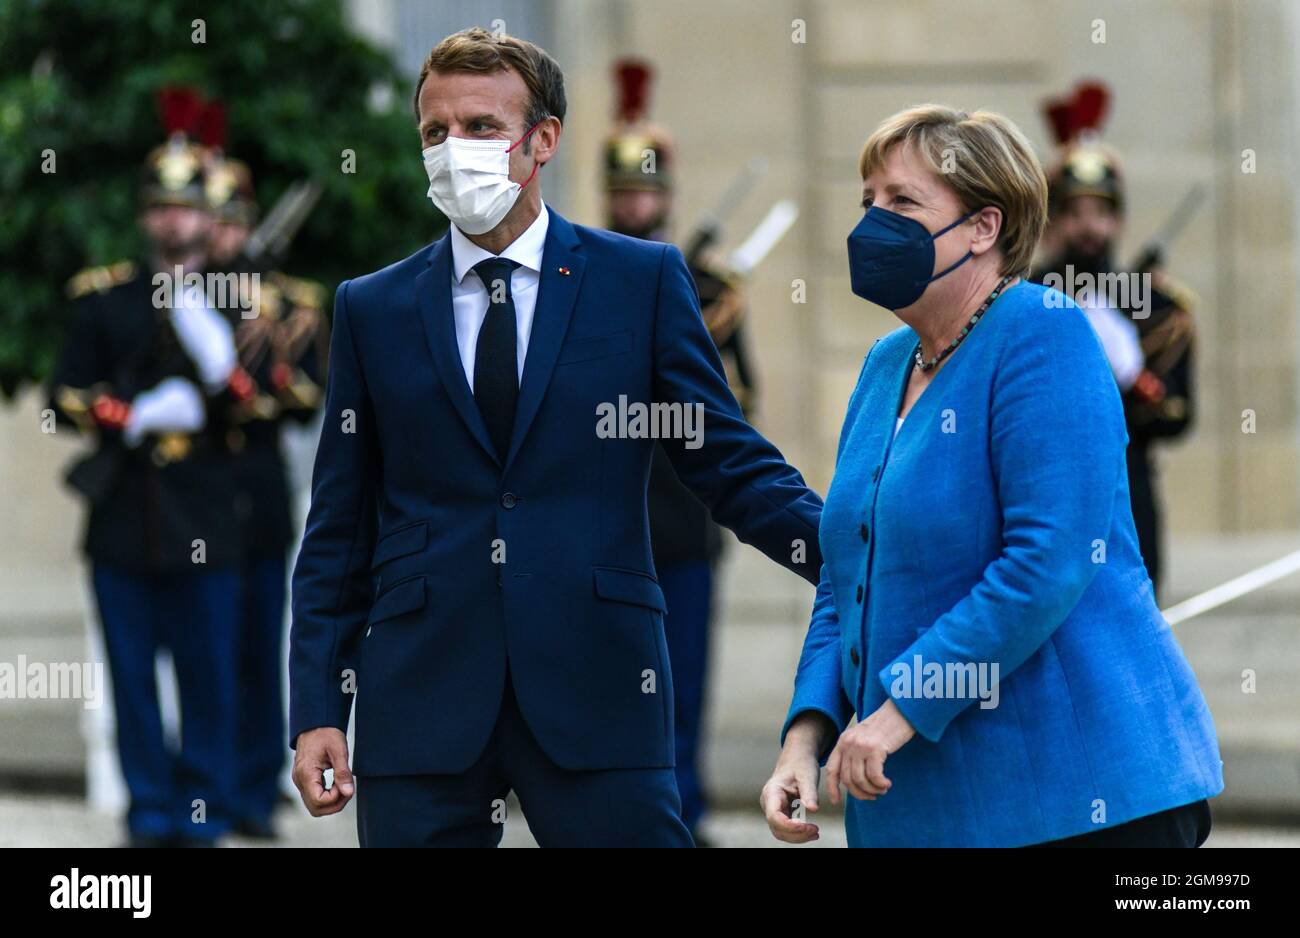 PARIS, FRANCE, 16 SEPTEMBER 2021.  Germany’s Chancellor Angela Merkel is welcomed by France’s President Emmanuel Macron prior to a working dinner at the Elysee Palace. Credit: Amaury Paul / Medialys Images/Sipa USA Stock Photo